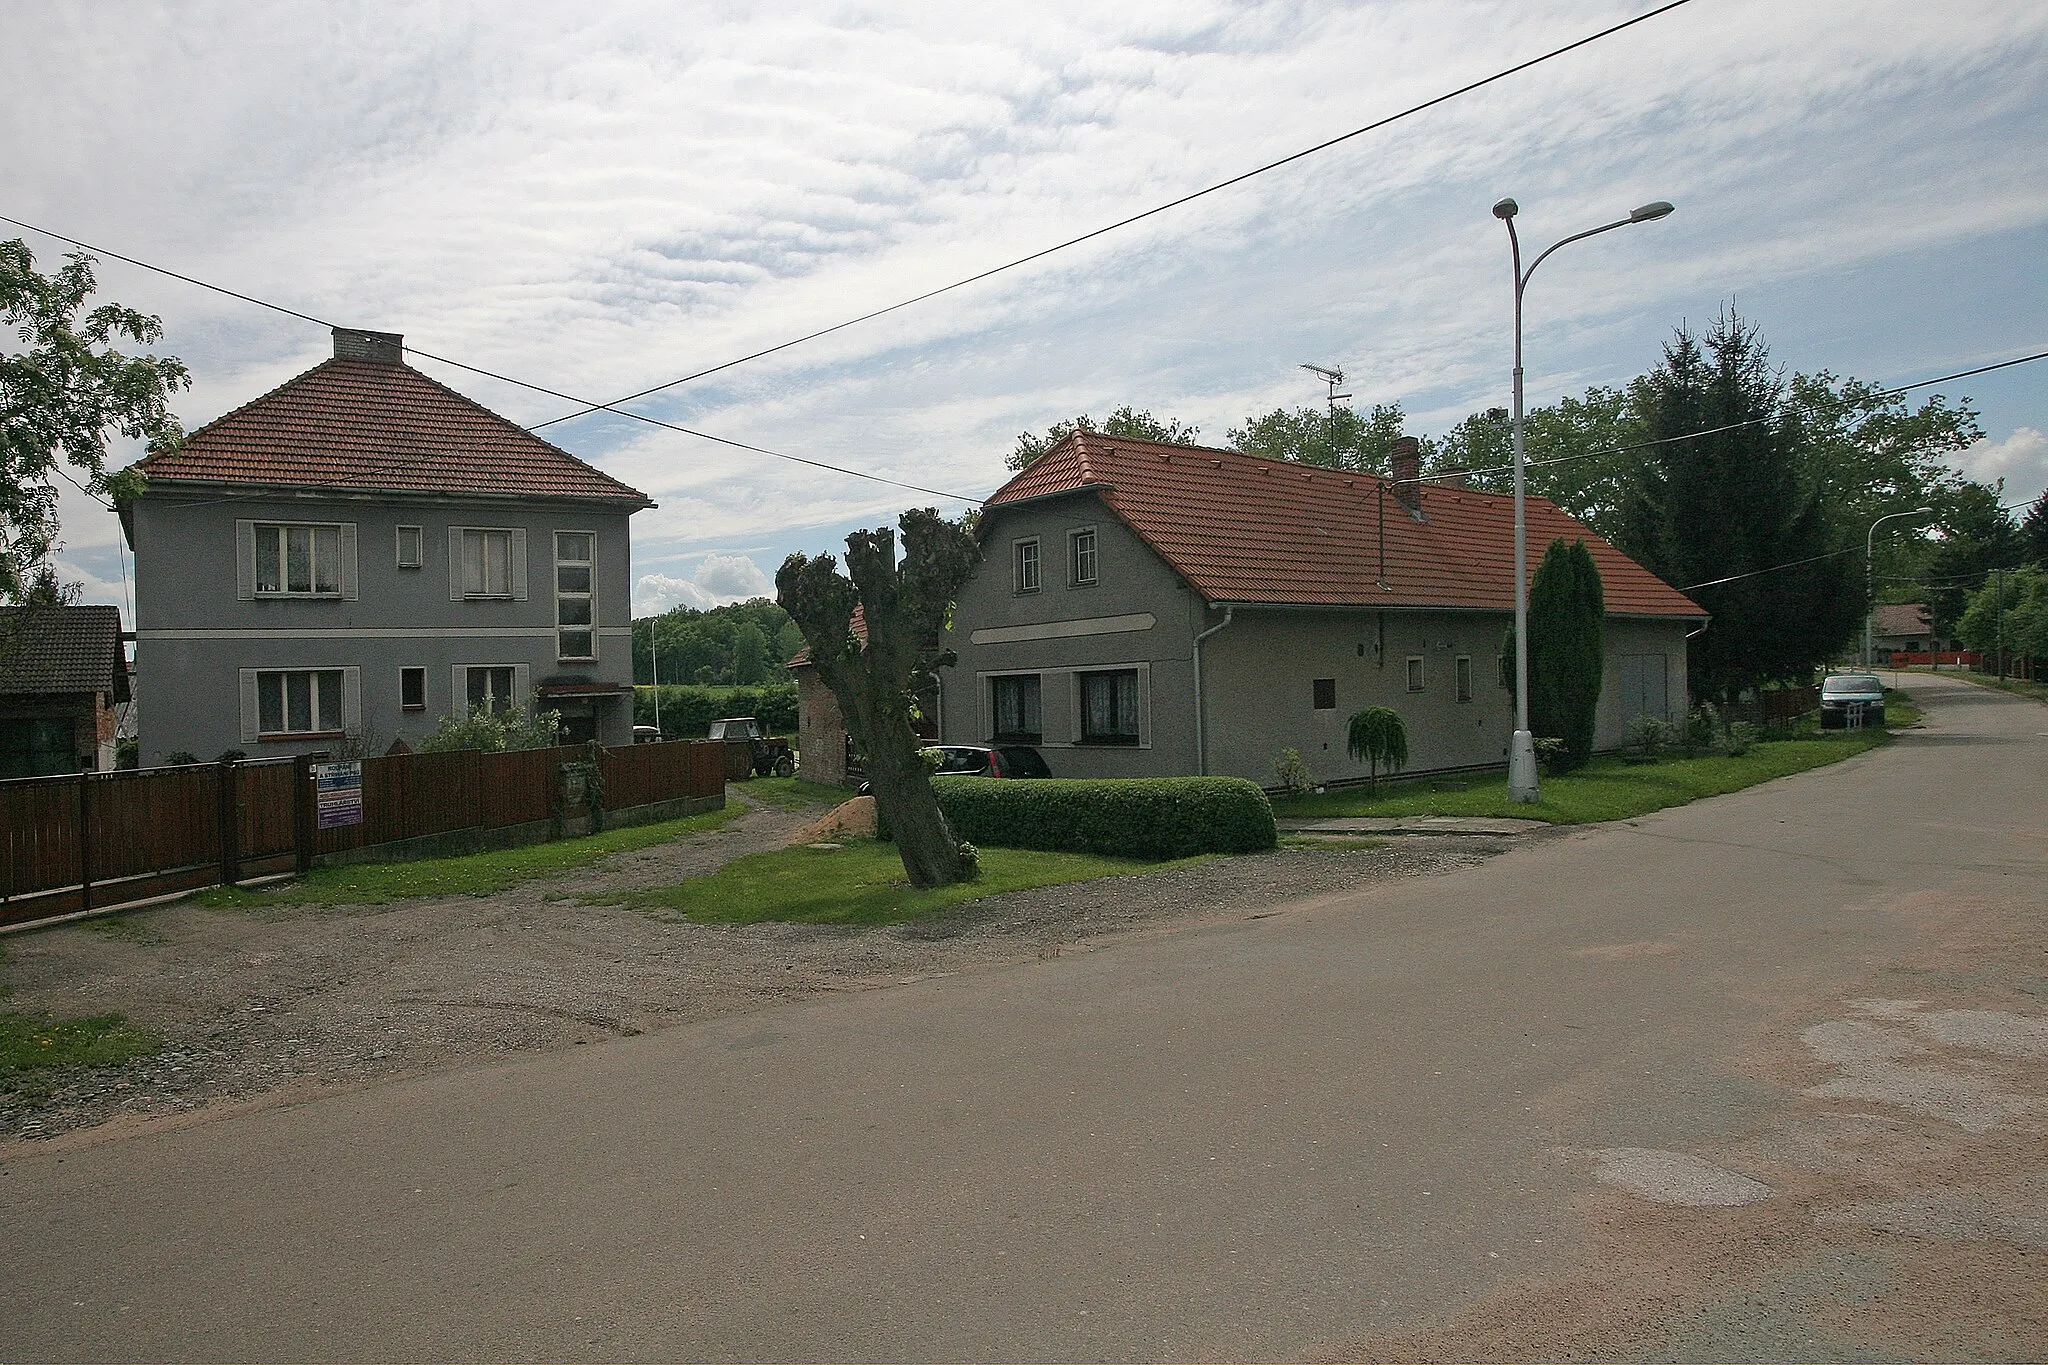 Photo showing: Zachrašťany čp. 30 a 69
Camera location 50° 12′ 39.92″ N, 15° 28′ 59.02″ E View this and other nearby images on: OpenStreetMap 50.211089;   15.483061

This file was created as a part of the photographic program of Wikimedia Czech Republic. Project: Foto českých obcí The program supports Wikimedia Commons photographers in the Czech Republic.